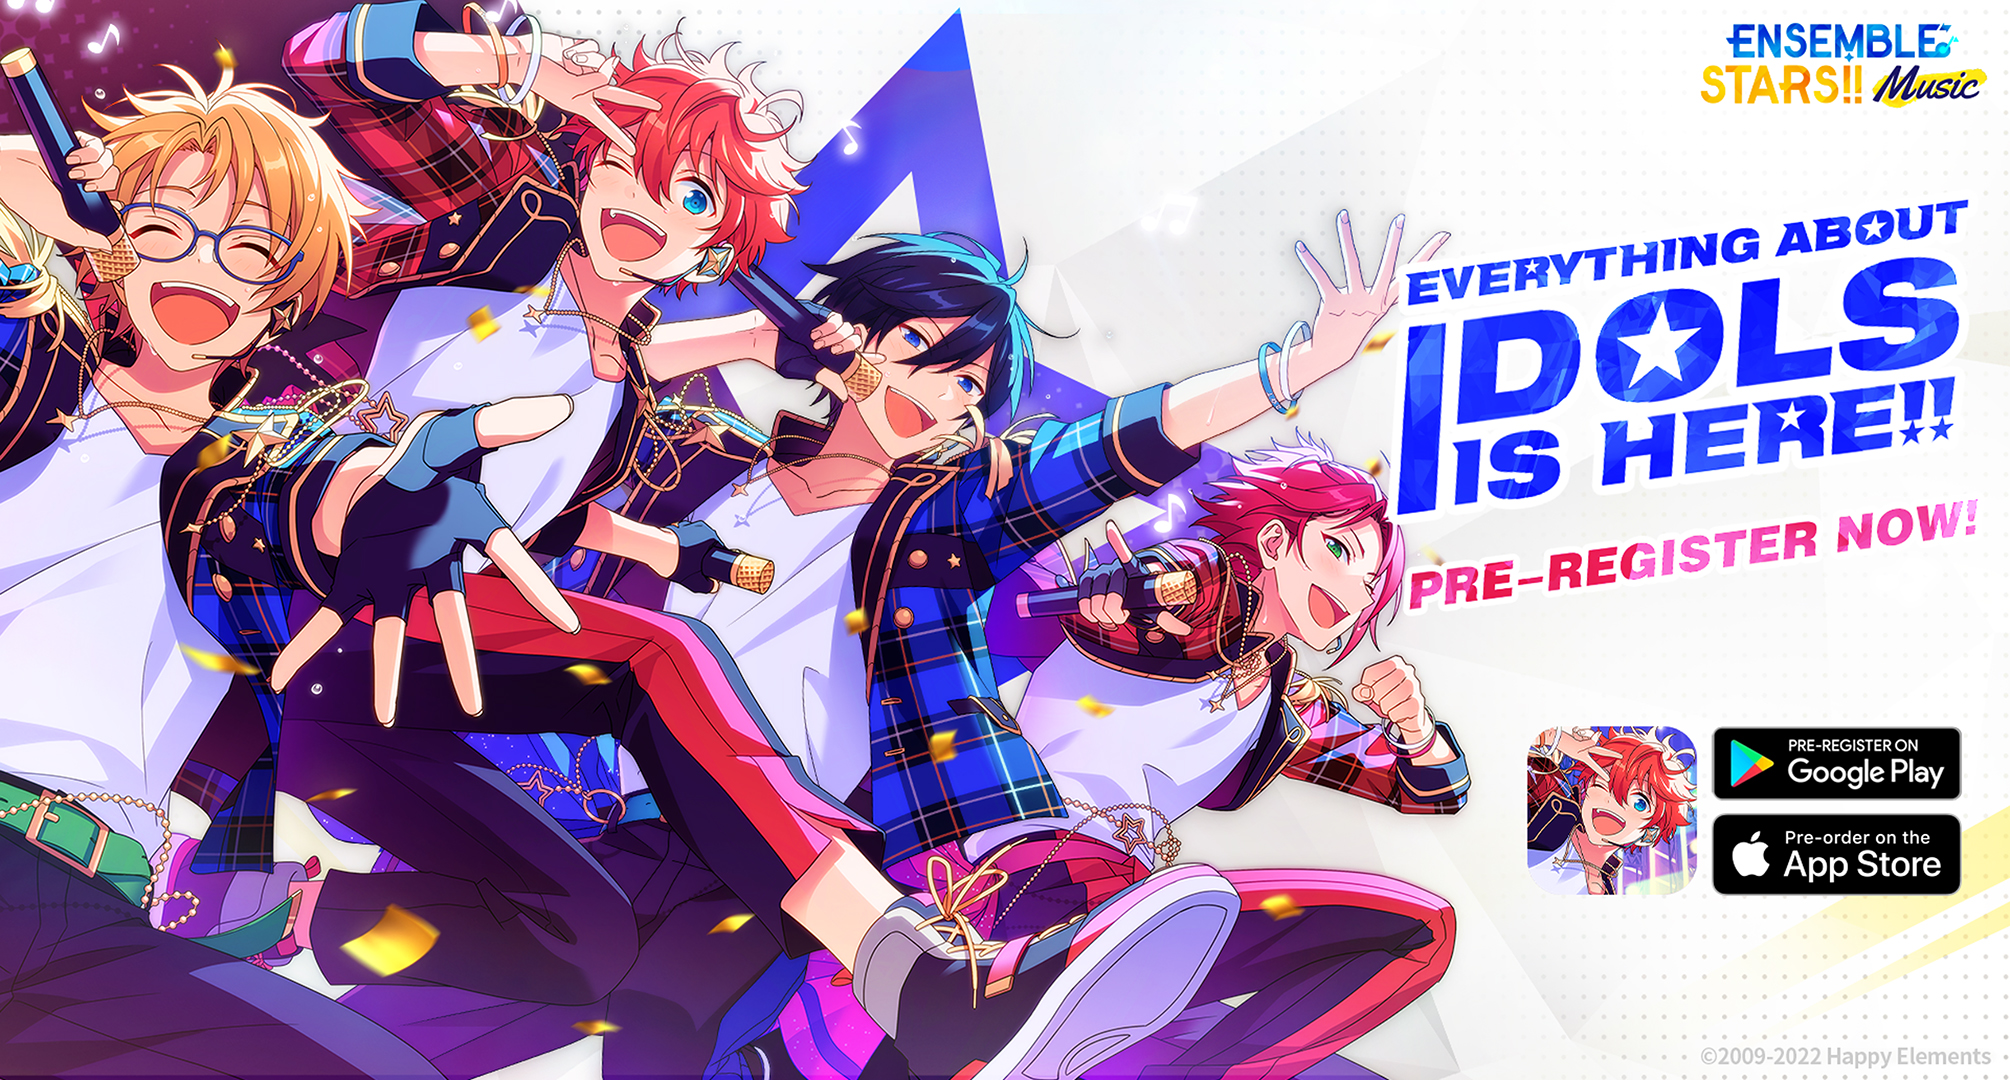 Ensemble Stars!! Music pre-registration image. Most of it is taken up by four idols. It states "Everything about idols is here! Pre-register now."